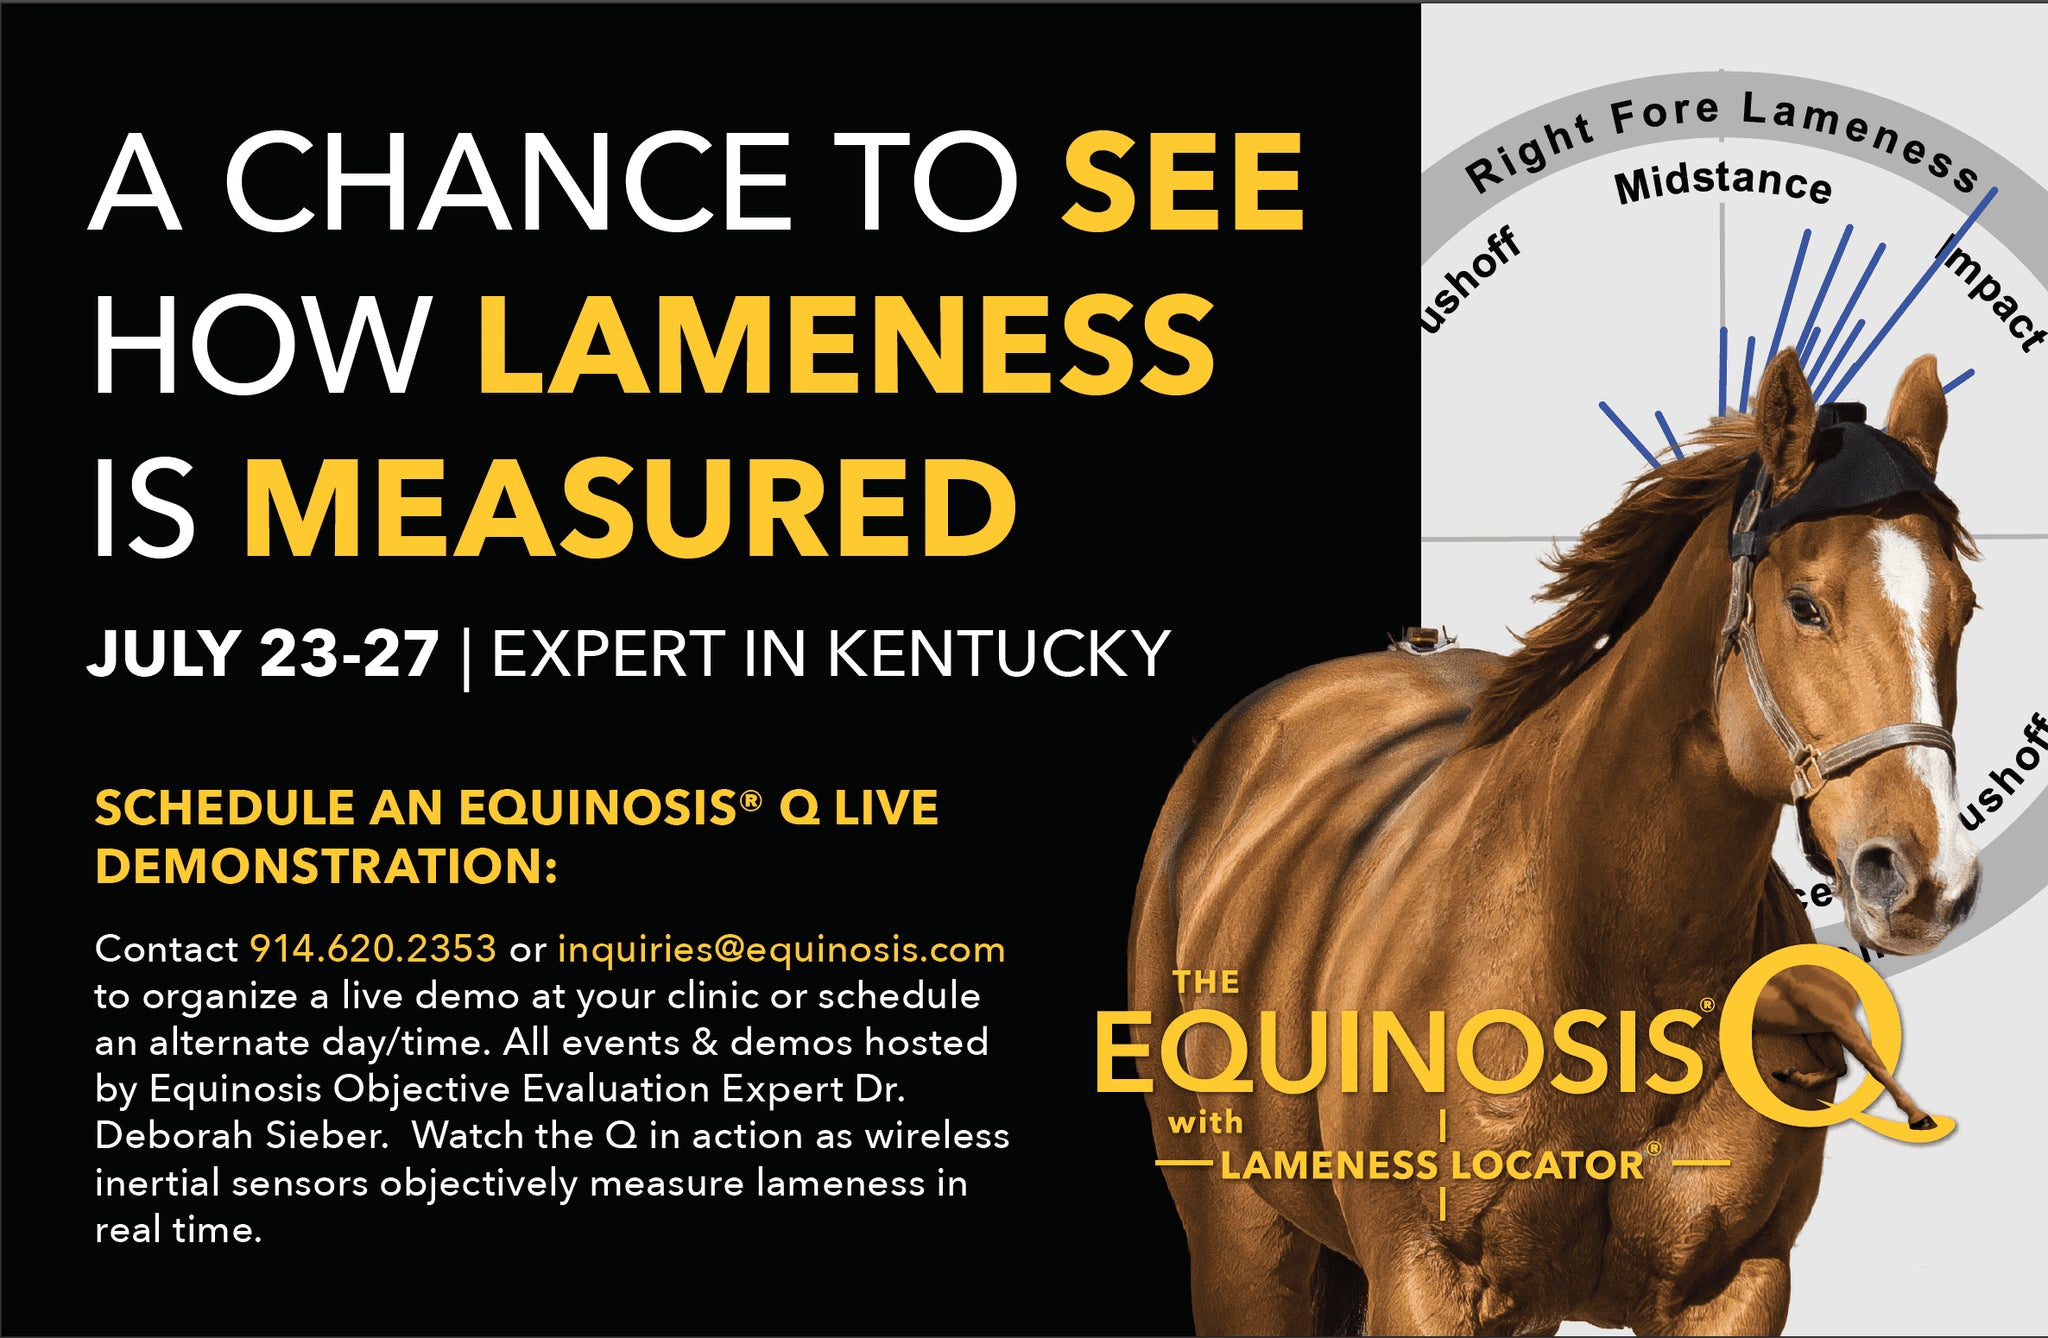 Objective Evaluation Experts Coming to Kentucky Next Week!